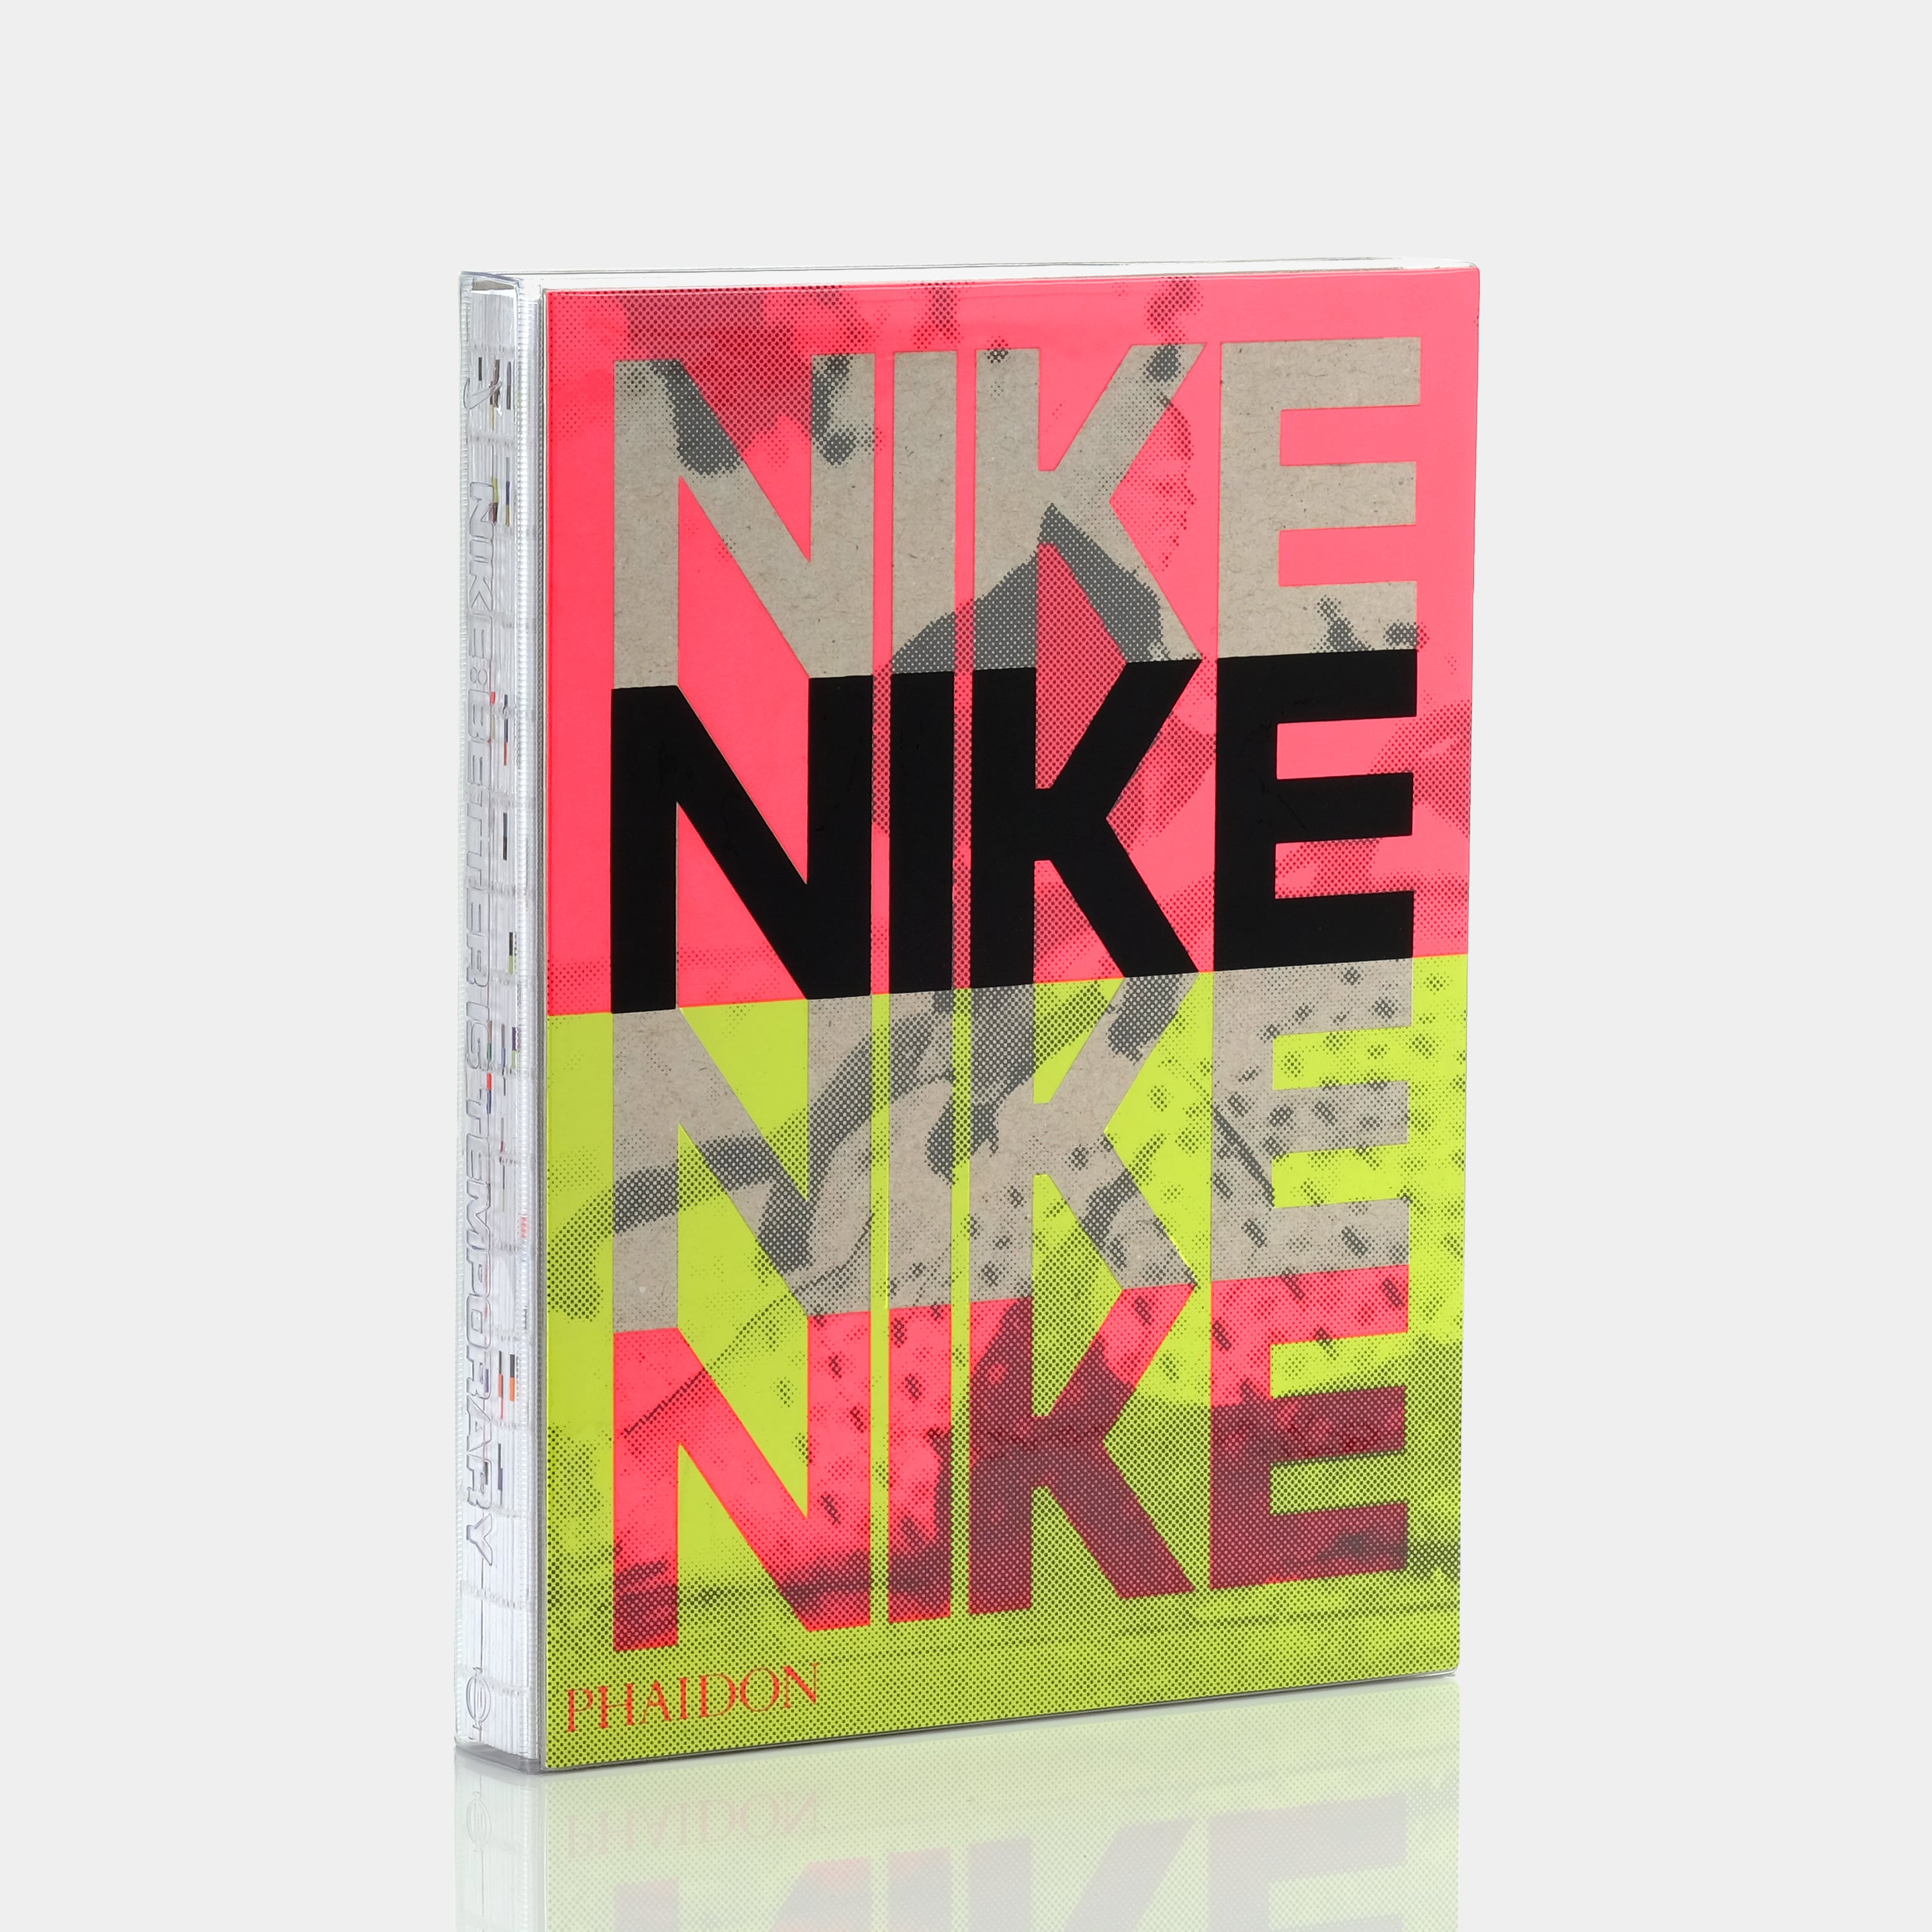 Nike: Better is Temporary by Sam Grawe Phaidon Book